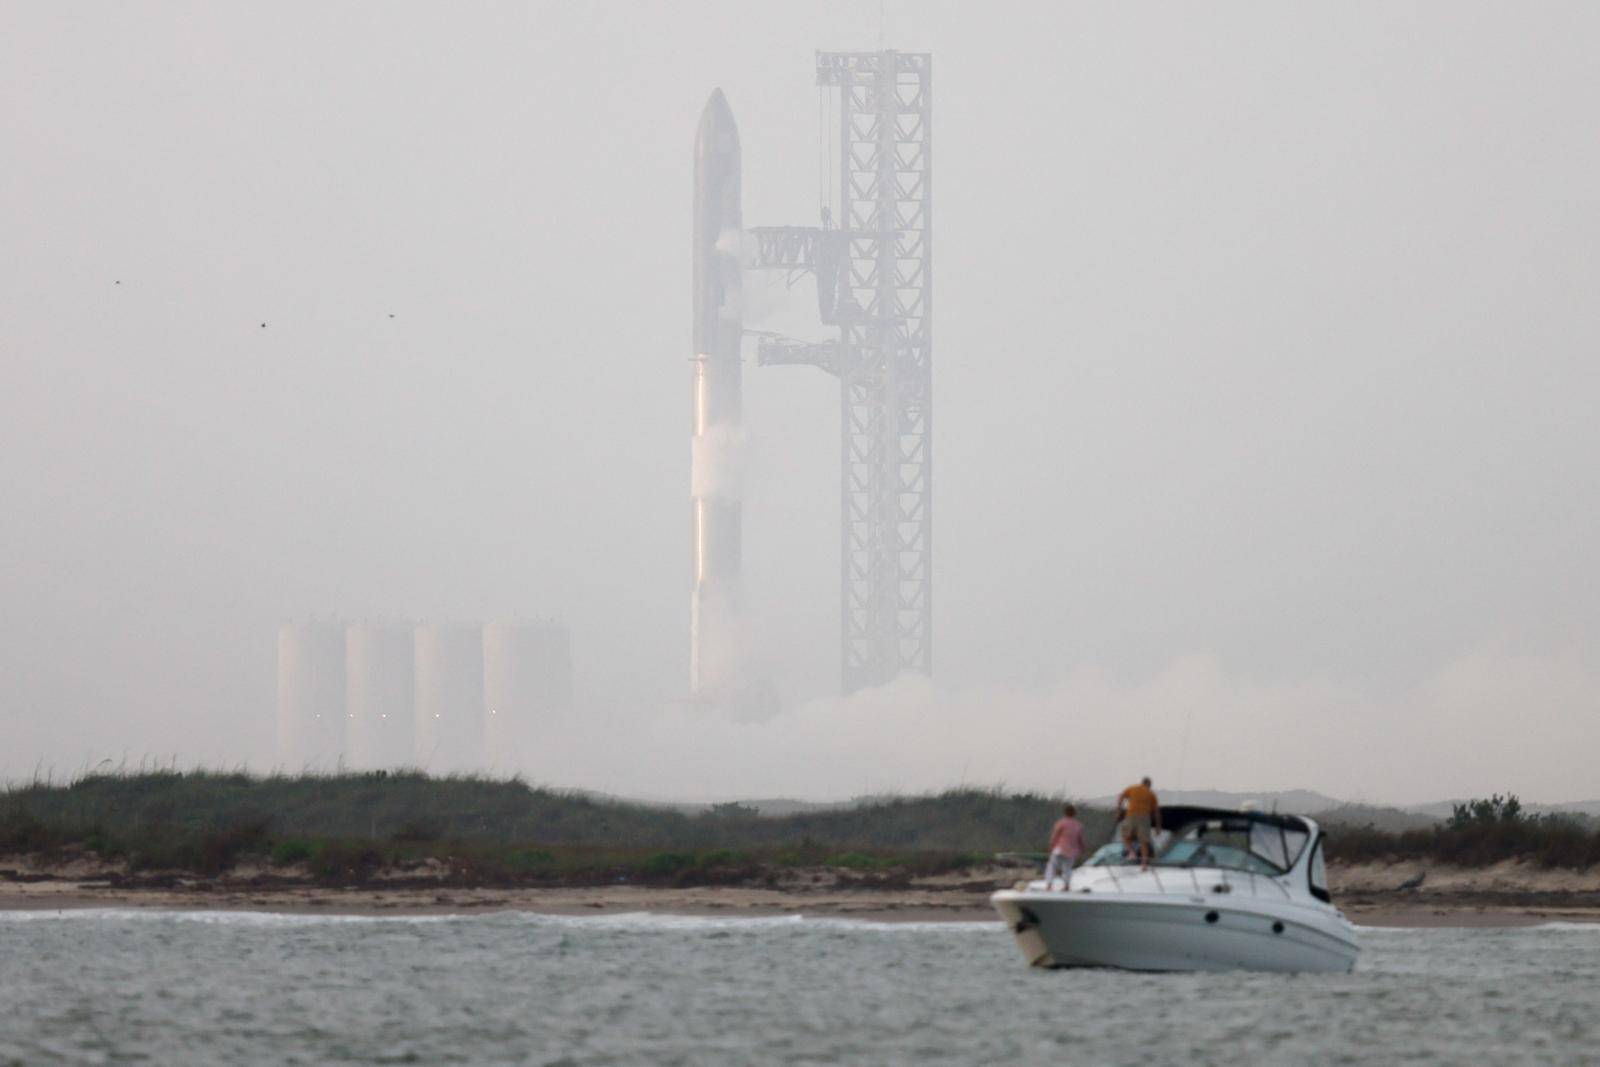 SpaceX aims to launch Starship spacecraft on test flight in Brownsville, Texas